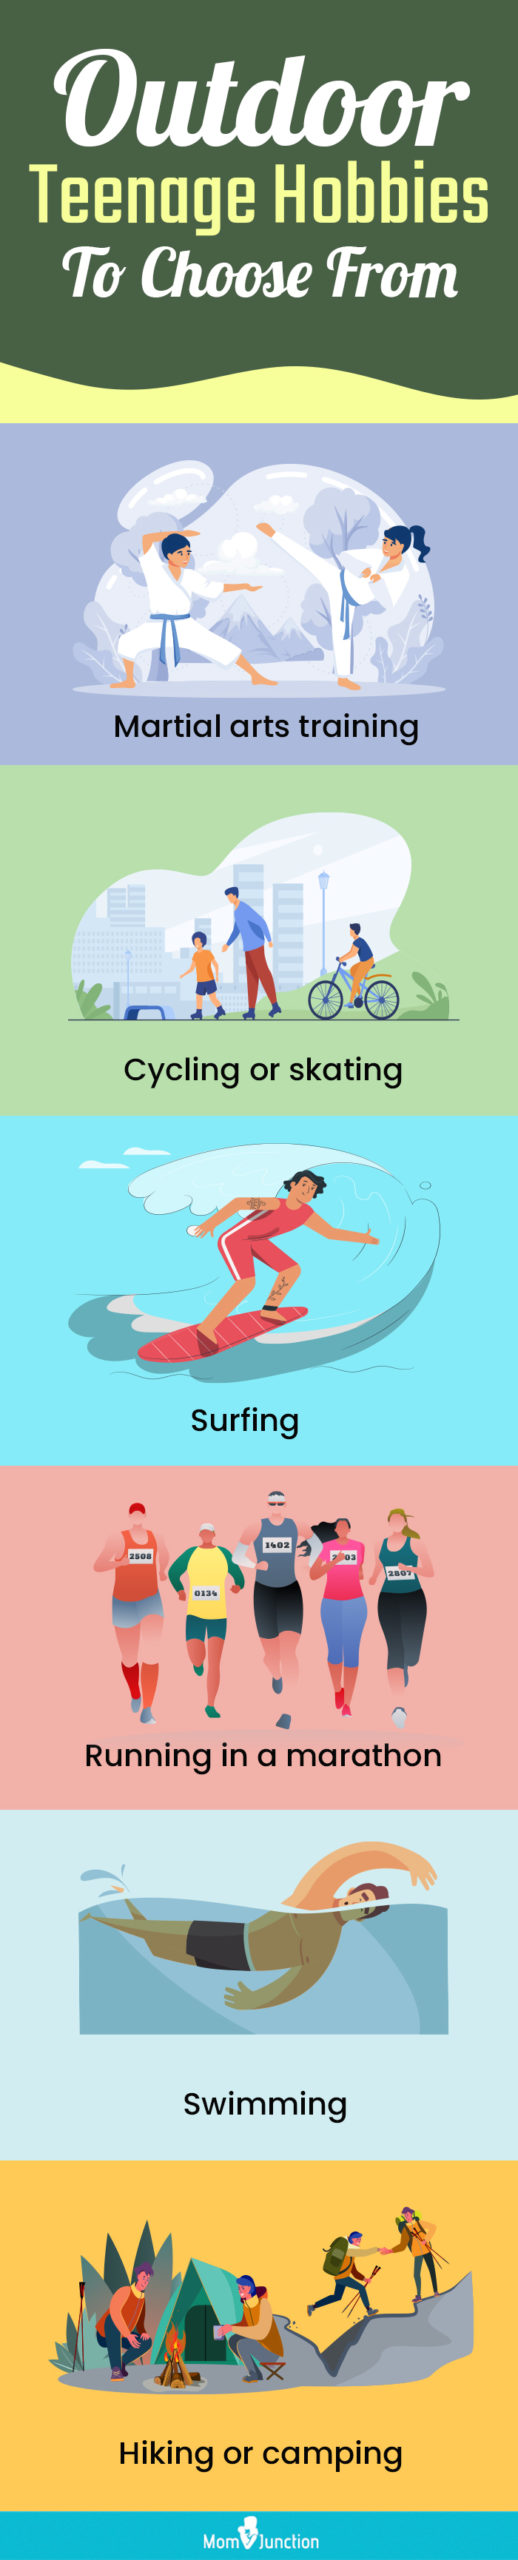 outdoor teenage hobbies to choose from (infographic)